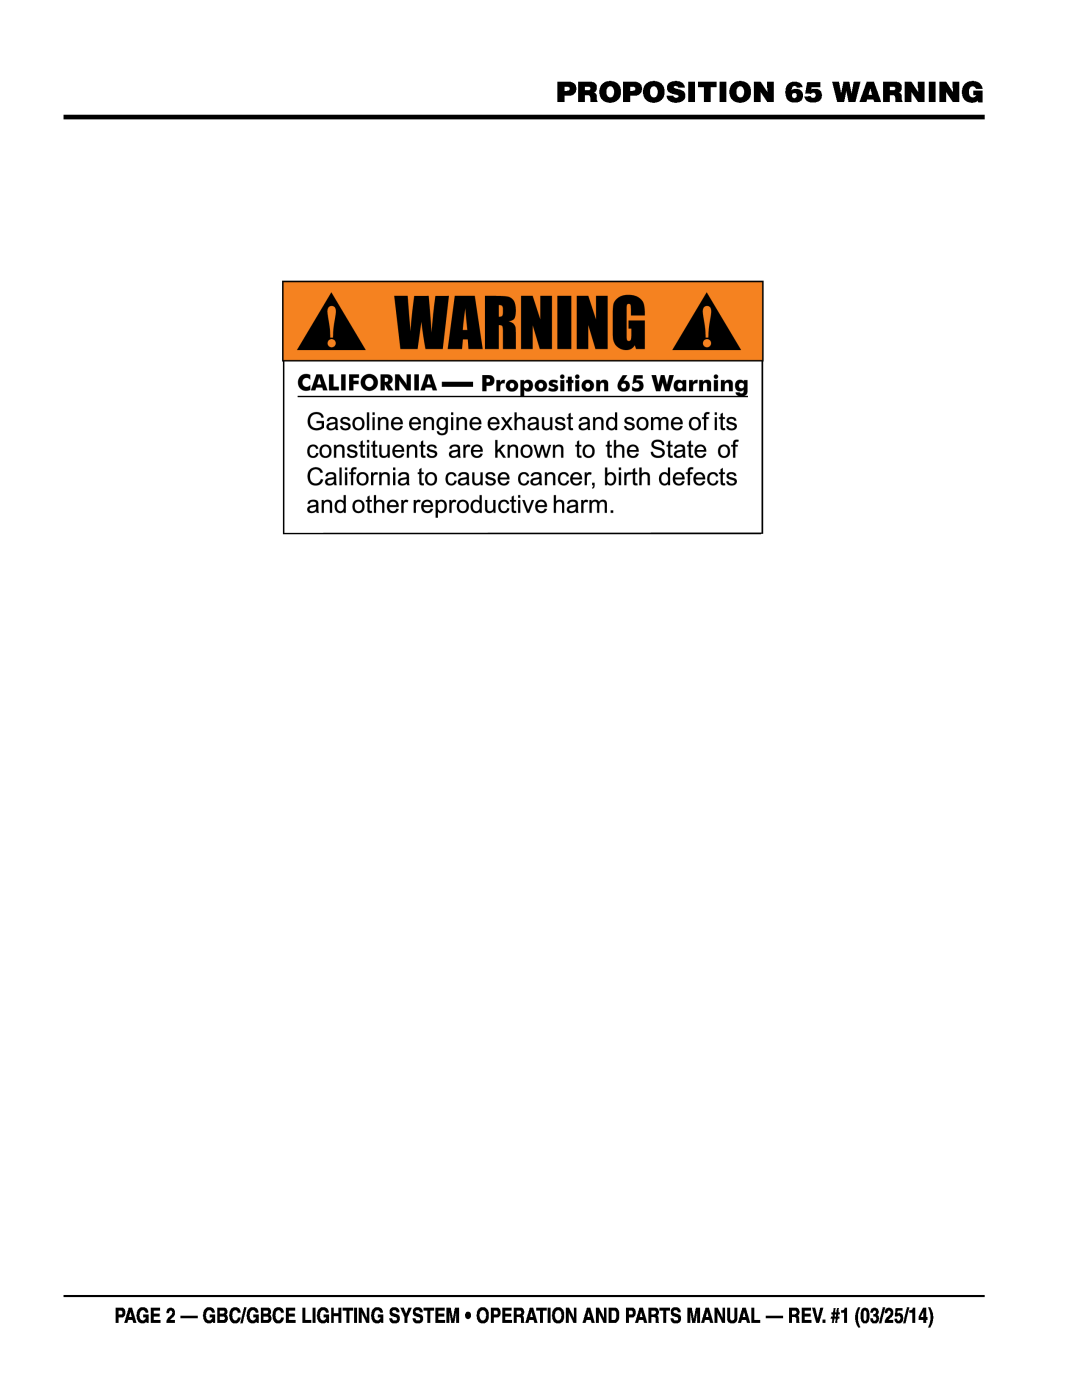 Multiquip gbe/gbce manual proposition 65 warning 